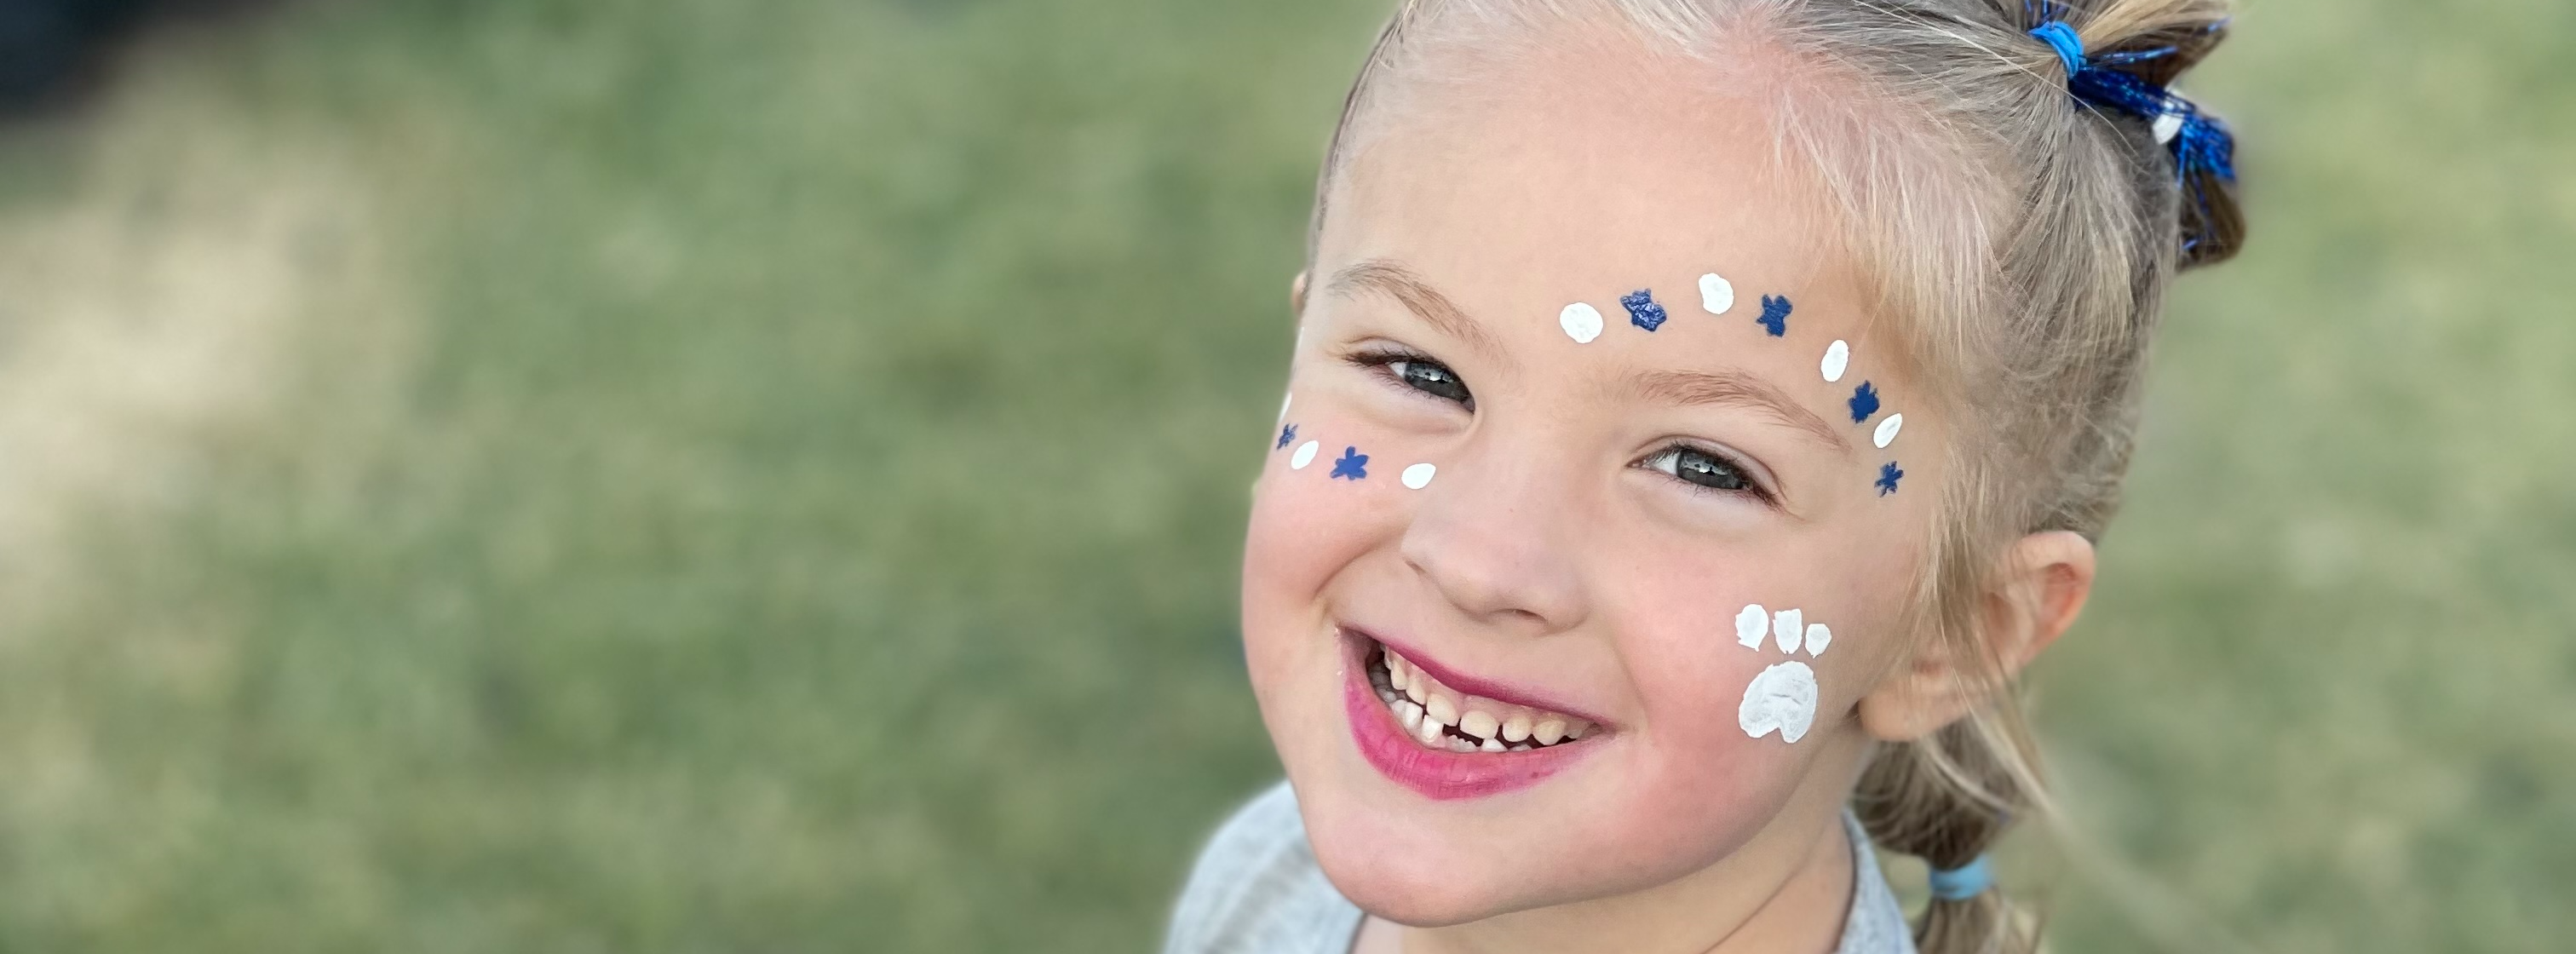 a smiling girl with blue and white pawprints painted on her face